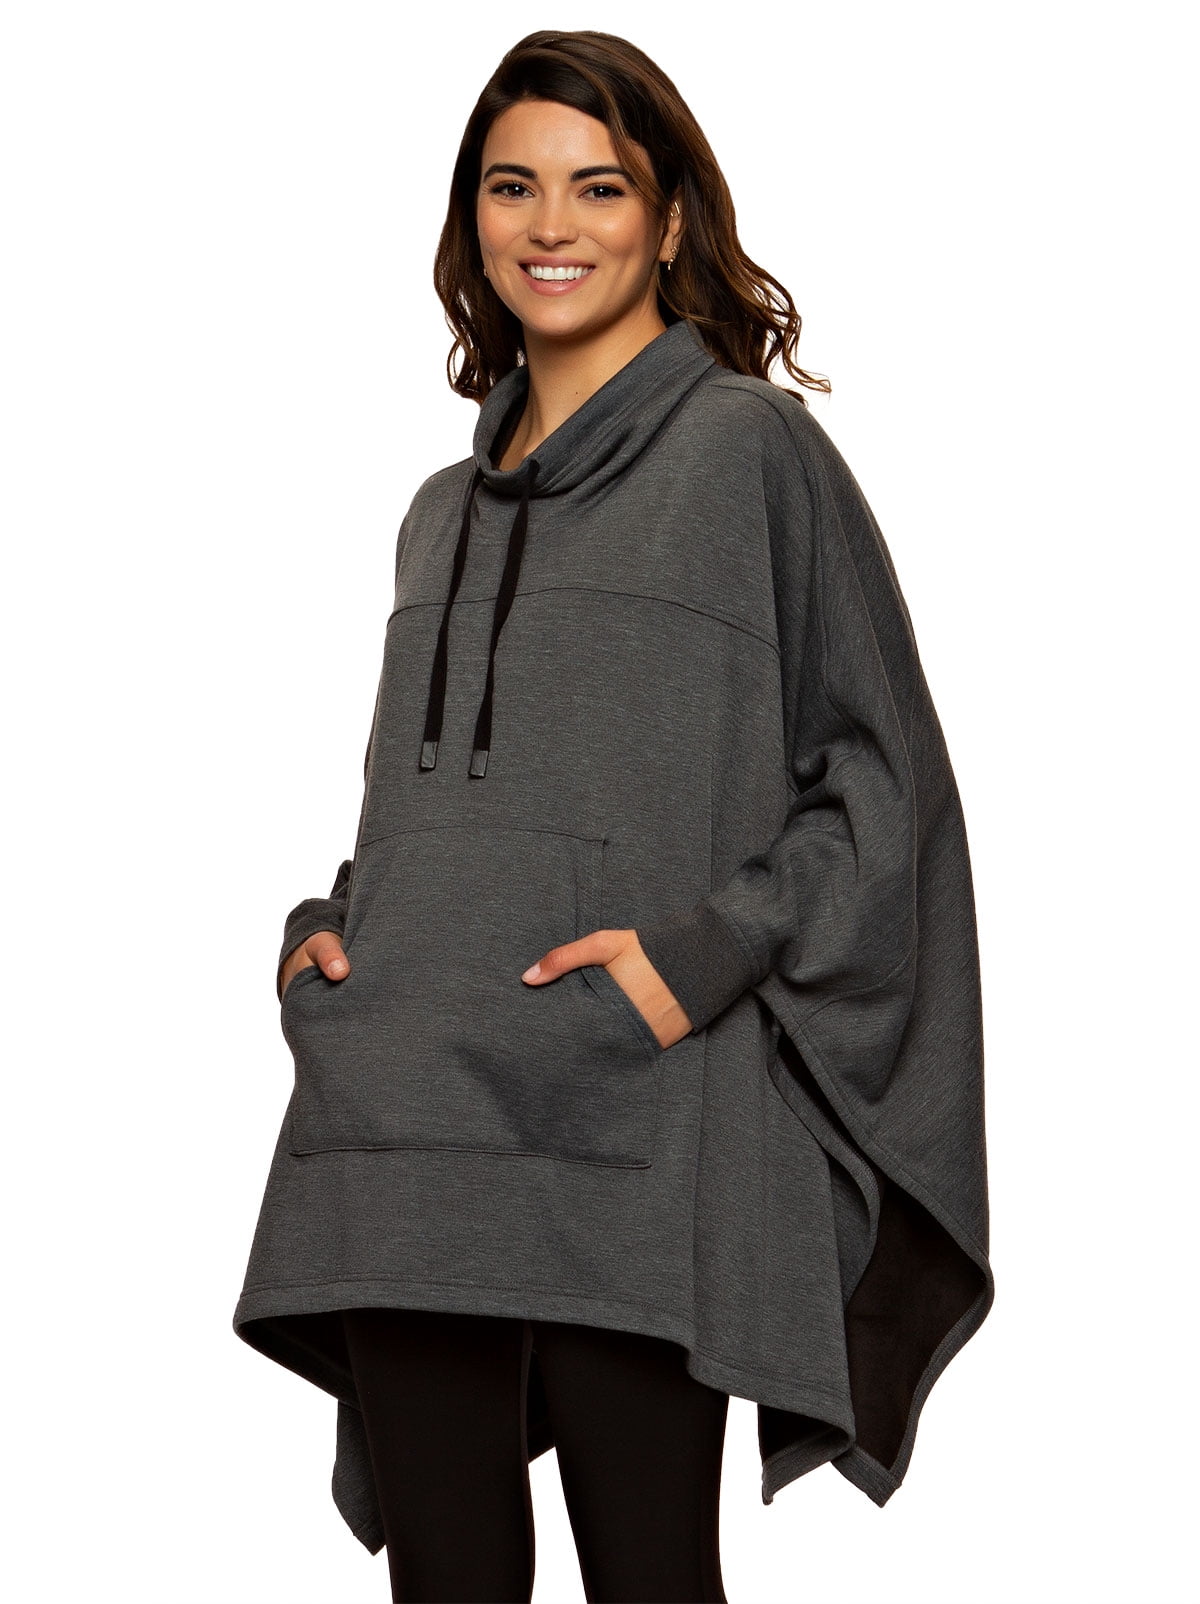 Cape Hoodie Charcoal Gray Poncho Poncho  Jacket  Sweater Coat ~ One Size ~ 5 Colors Hooded Poncho Fleece Coat  Cardigan